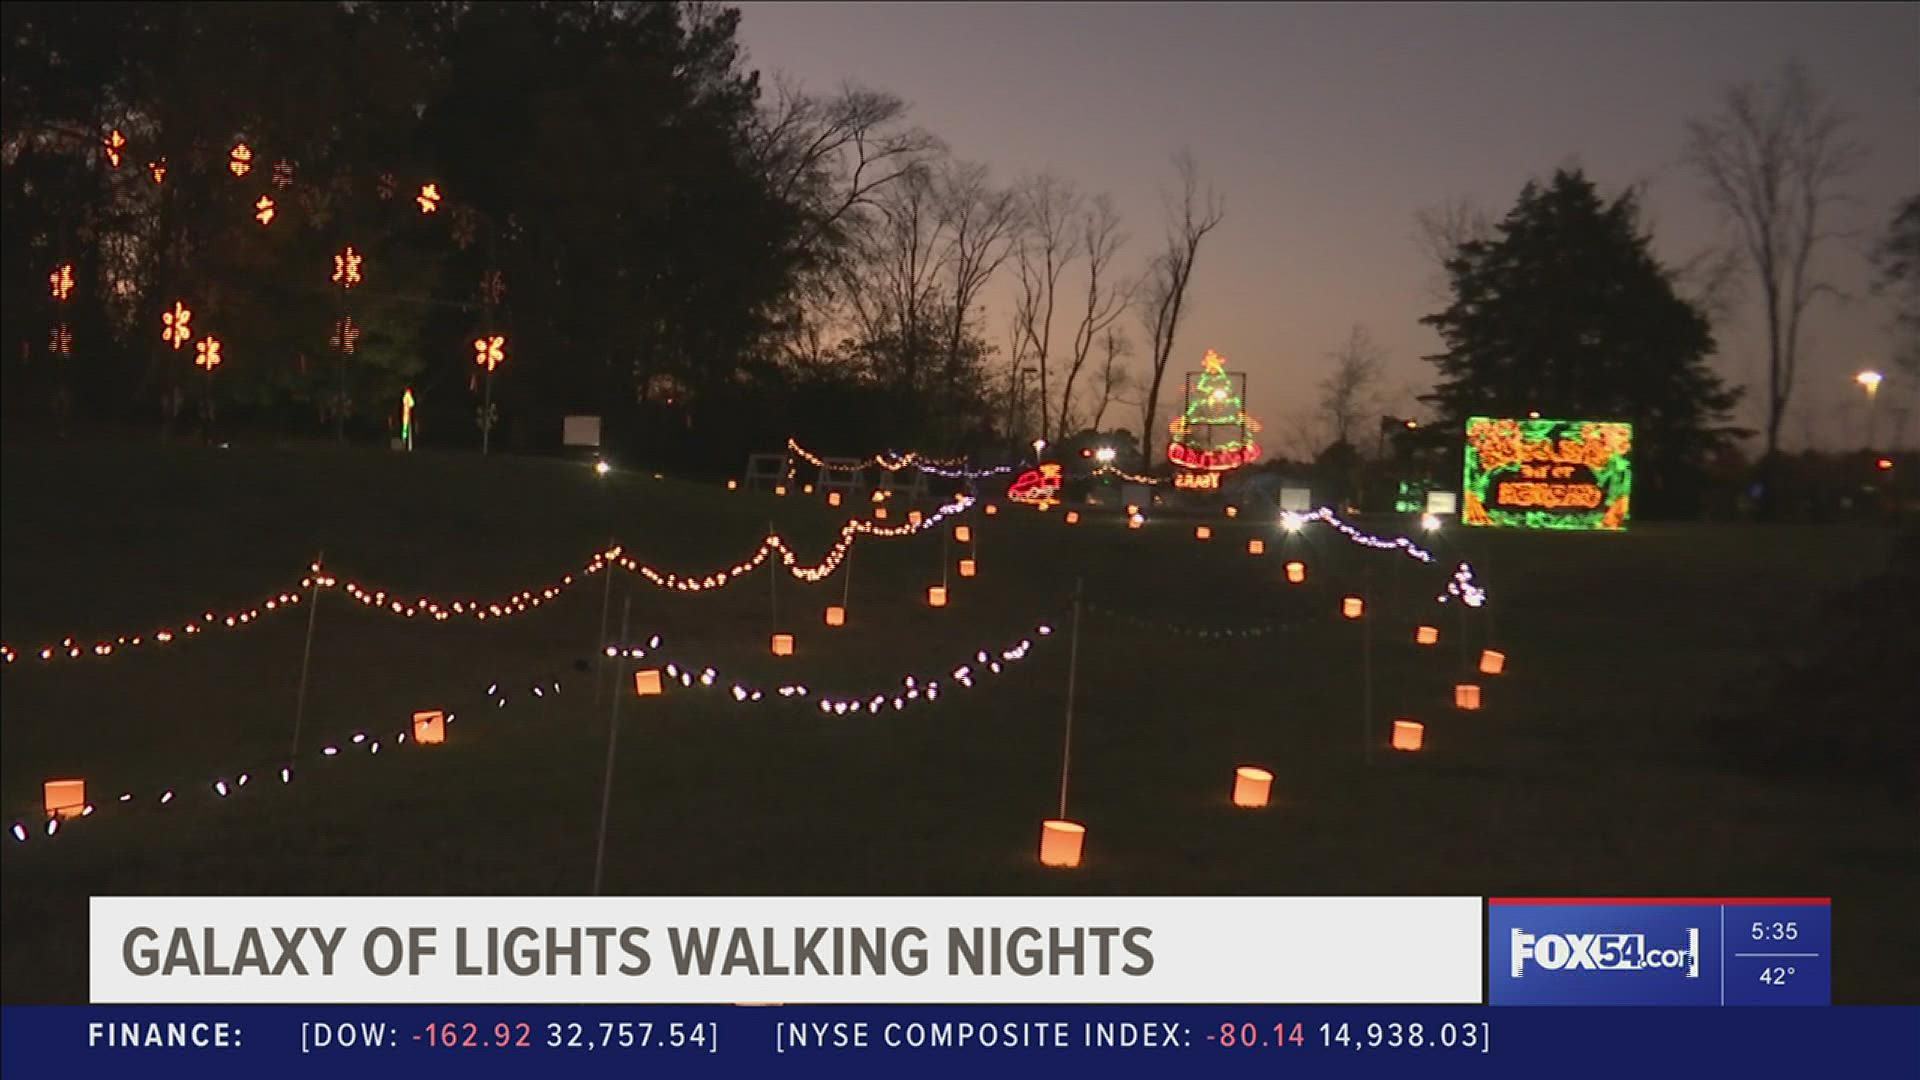 You can experience the Christmas lights with their walking nights now until January 1st. Tickets range from $9 to $16 dollars and on peak days, $12 to $19.